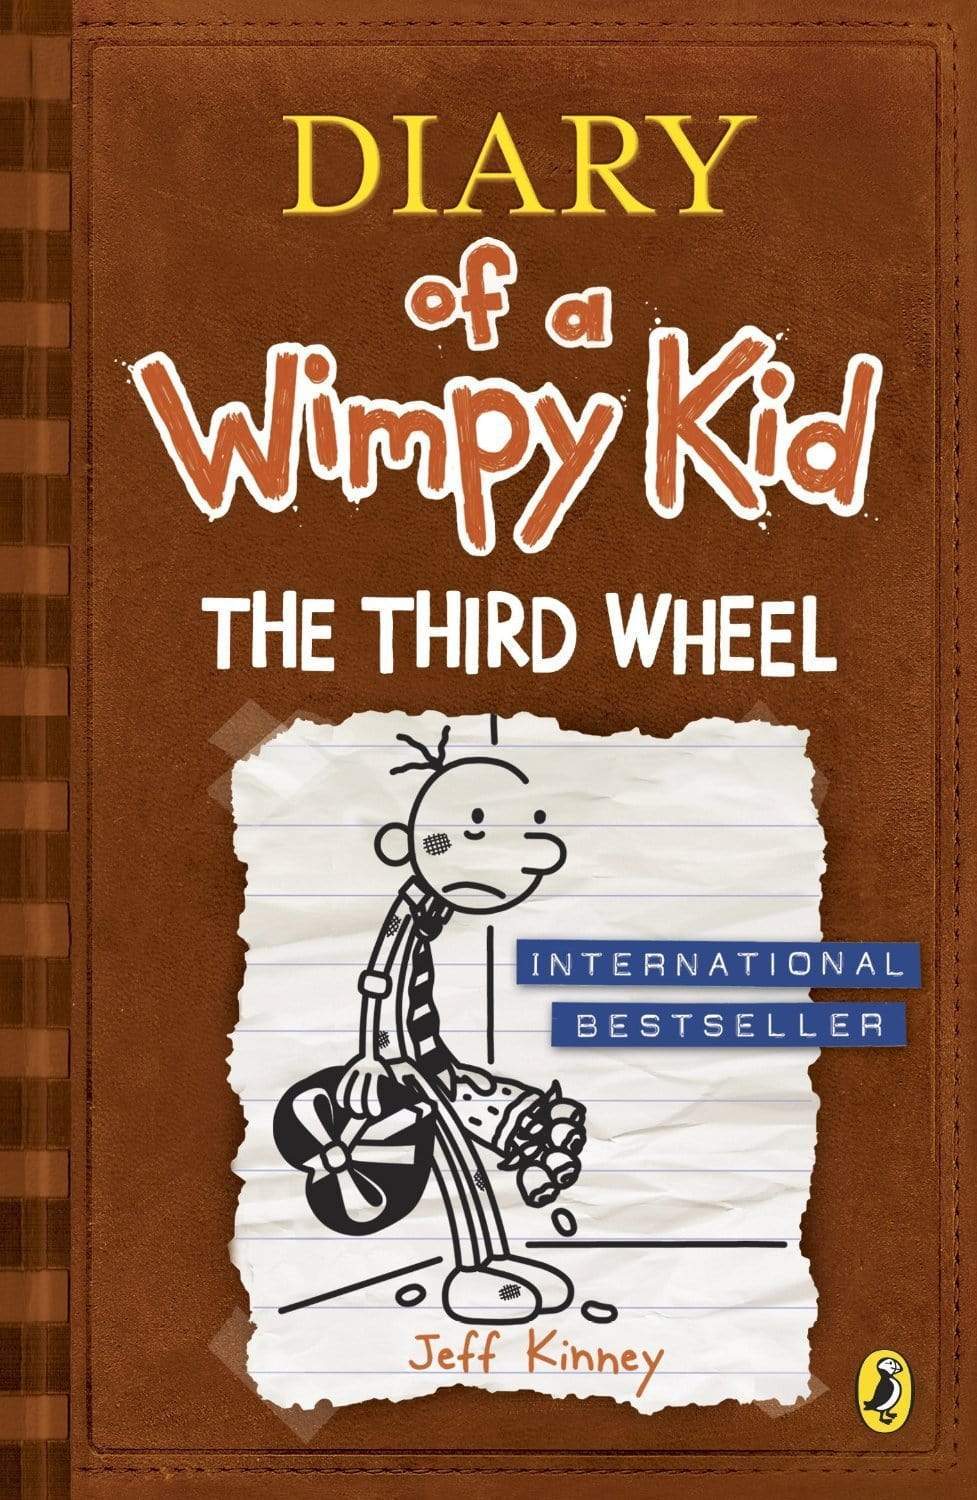 Diary Of A Wimpy Kid: The Third Wheel